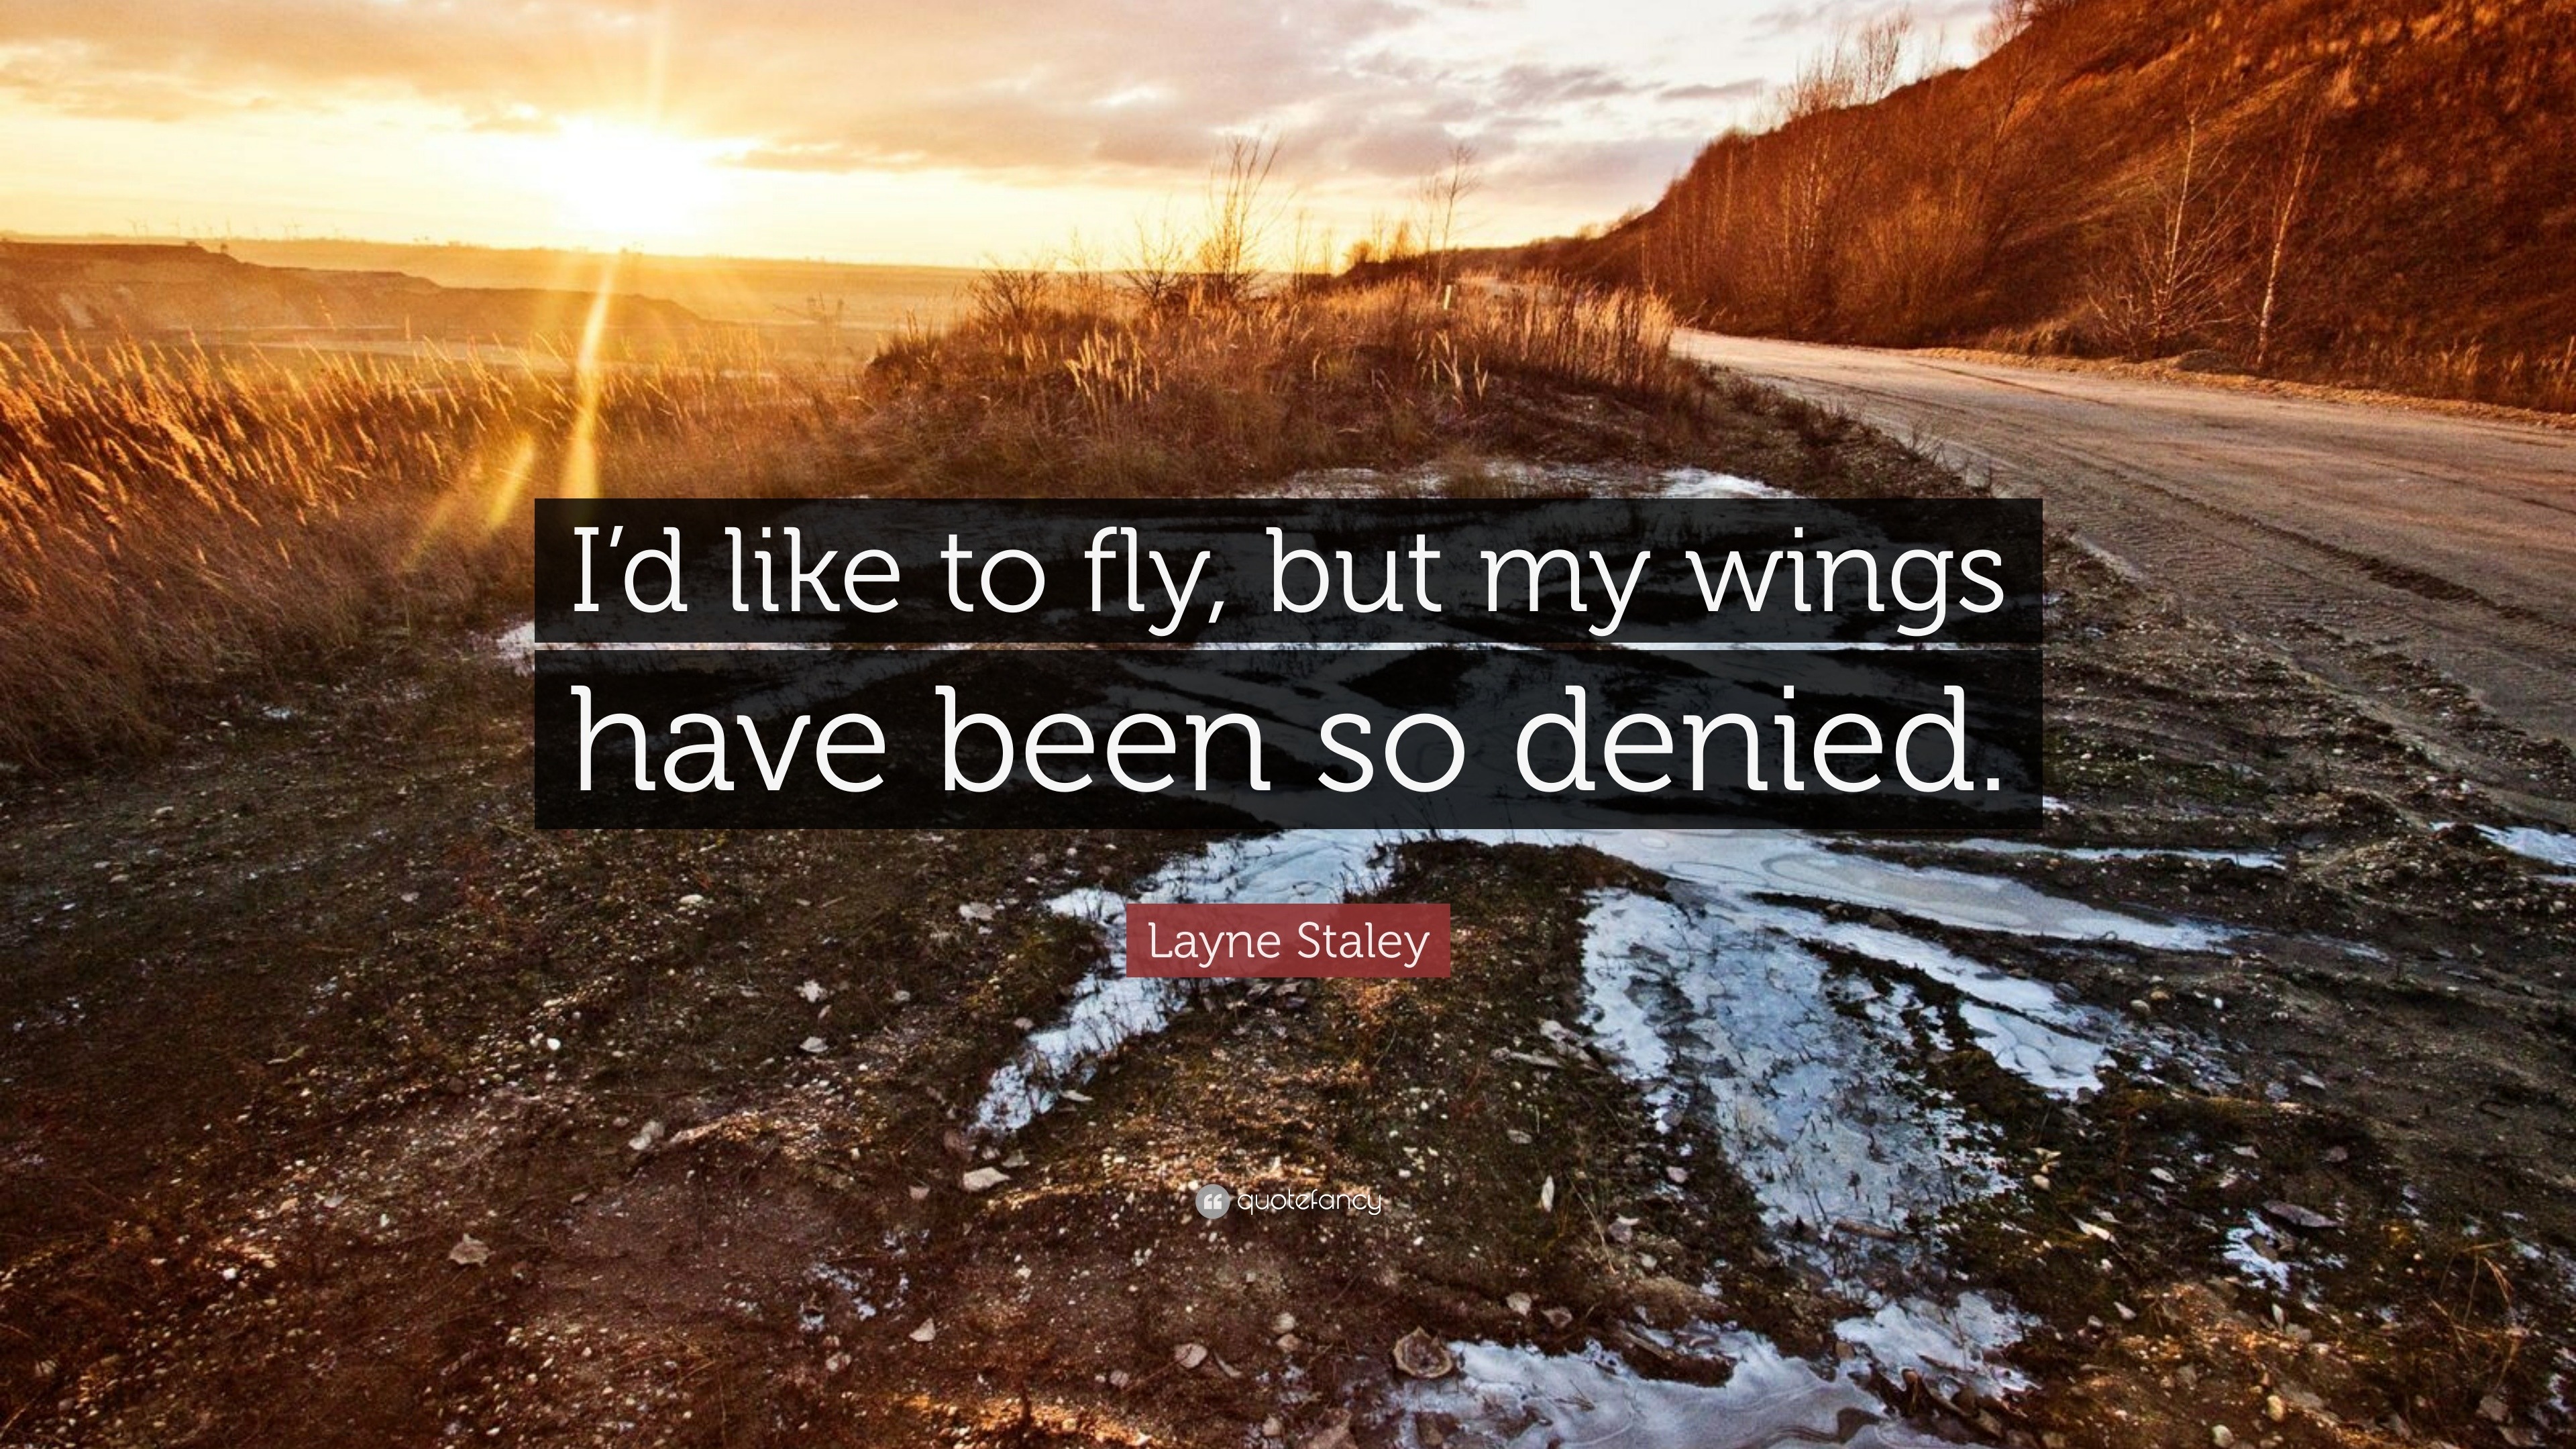 Image result for i'd like to fly but my wings have been so denied